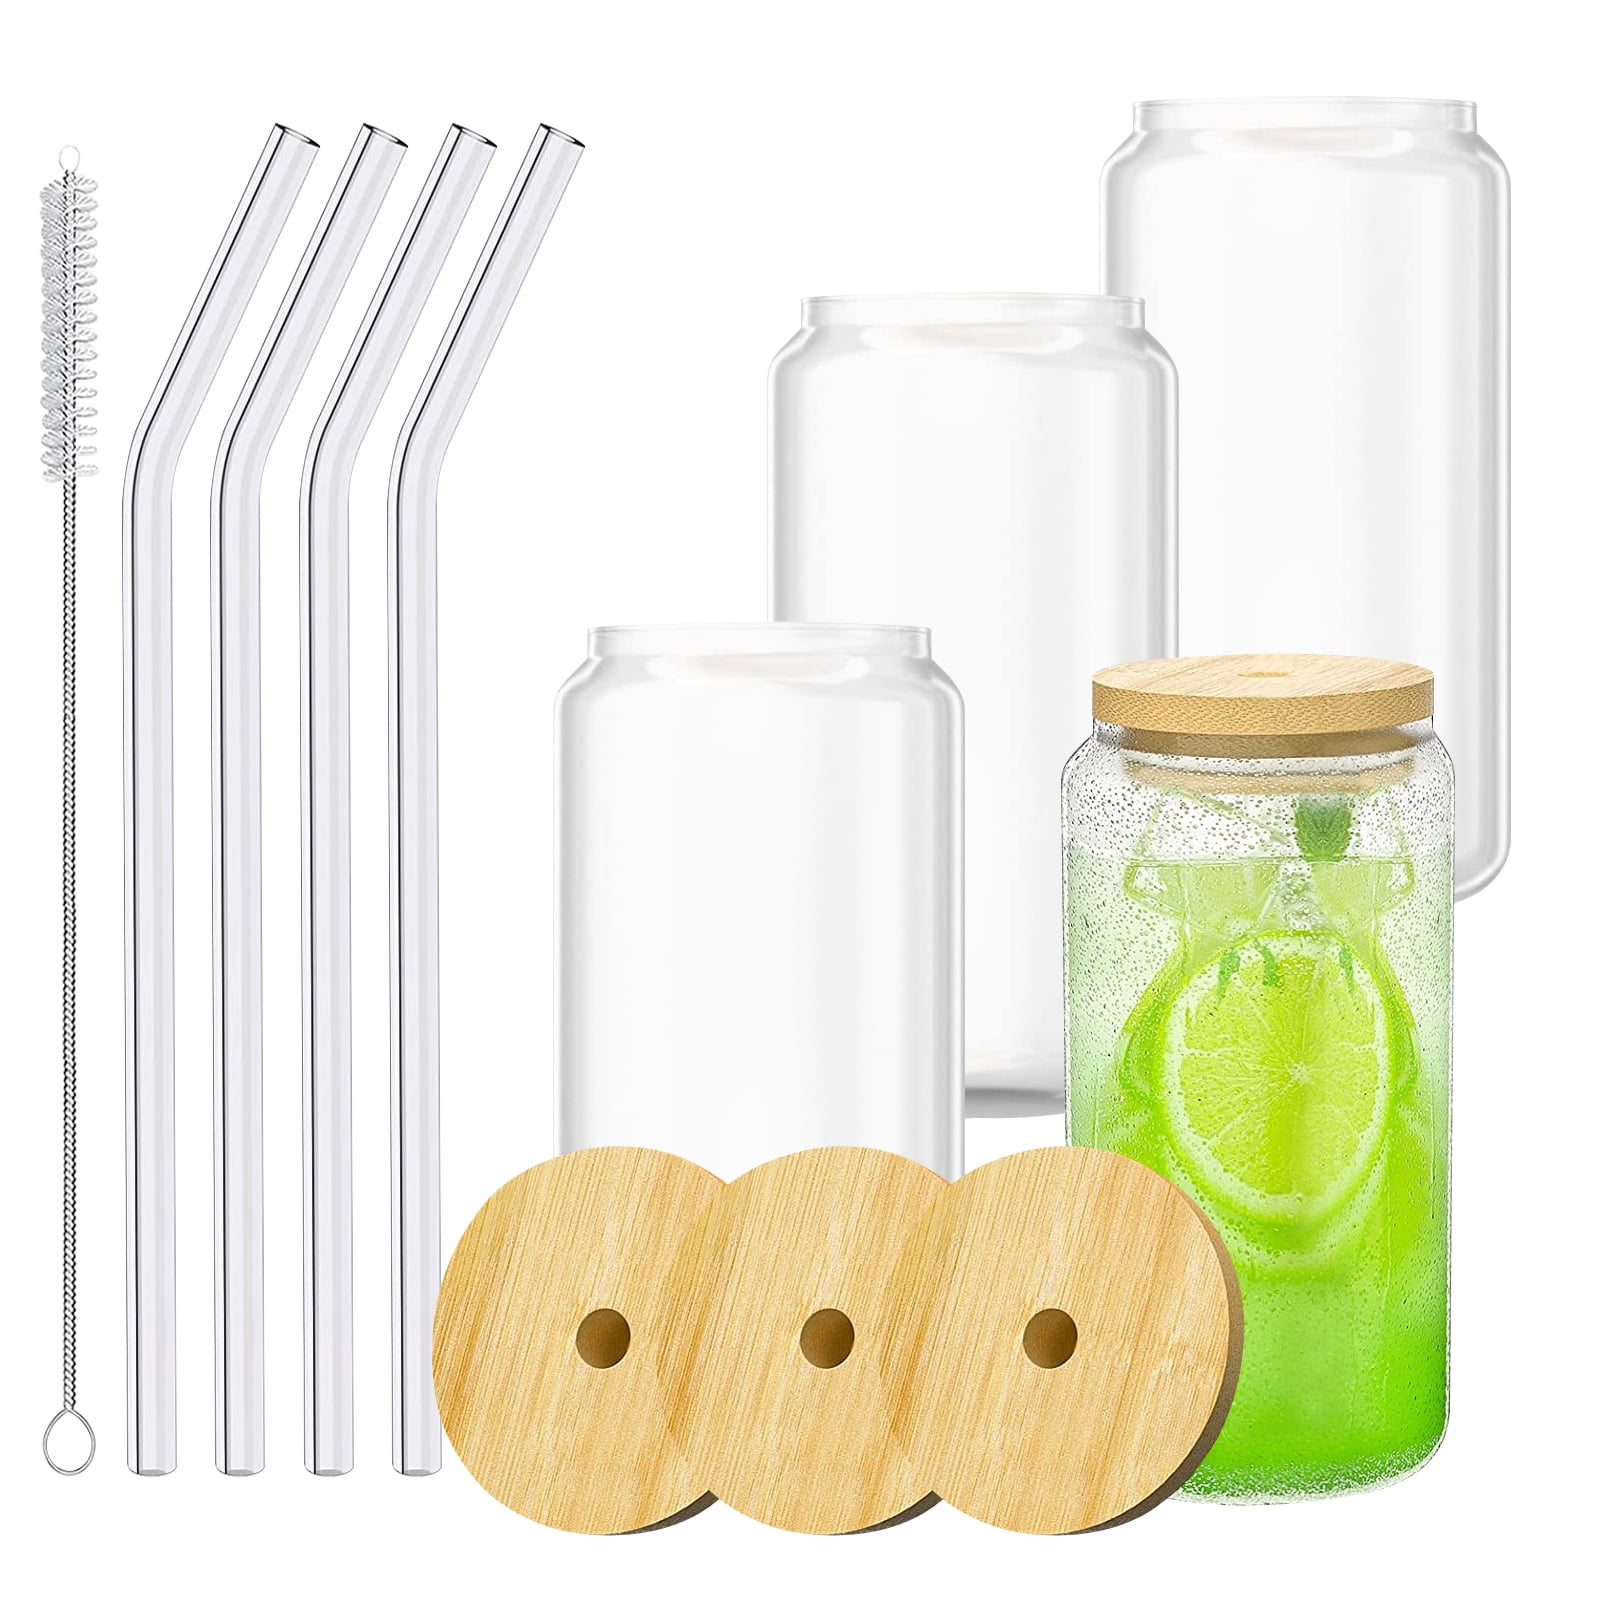 16 OZ Glass Cups with Bamboo Lids and Glass Straw - 12pcs Set Beer Shaped  Drinking Glasses, Iced Cof…See more 16 OZ Glass Cups with Bamboo Lids and